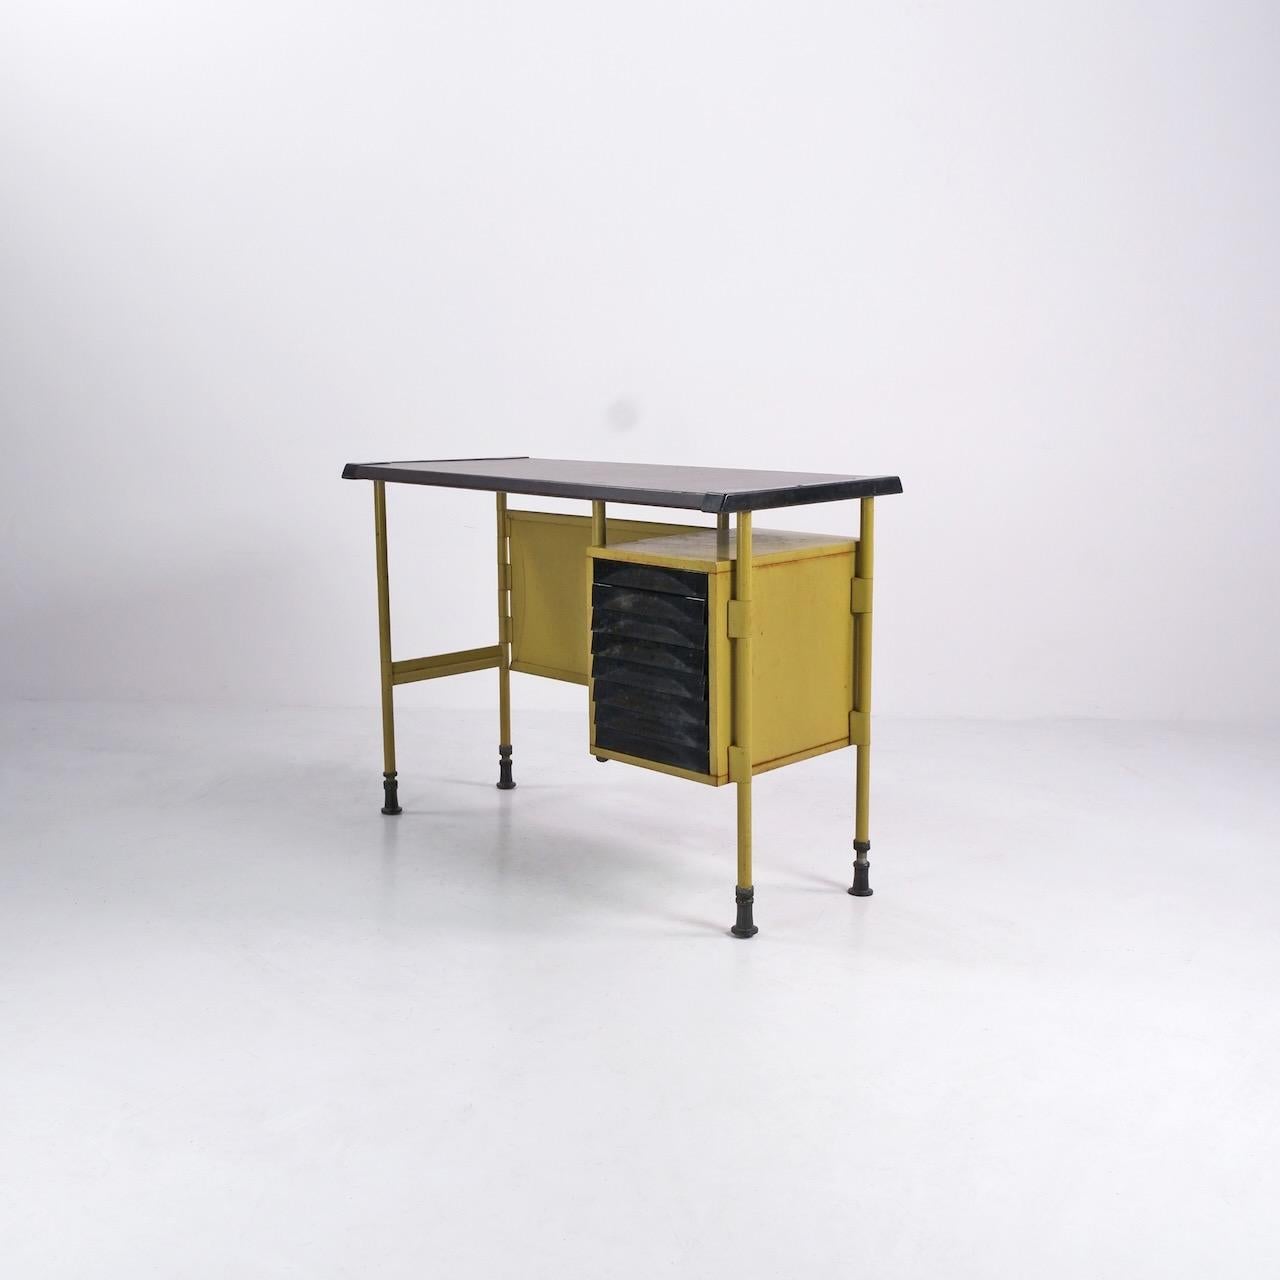 Italian Compact Spazio Desk by BBPR Architects / Olivetti Synthesis, Italy, c.1960